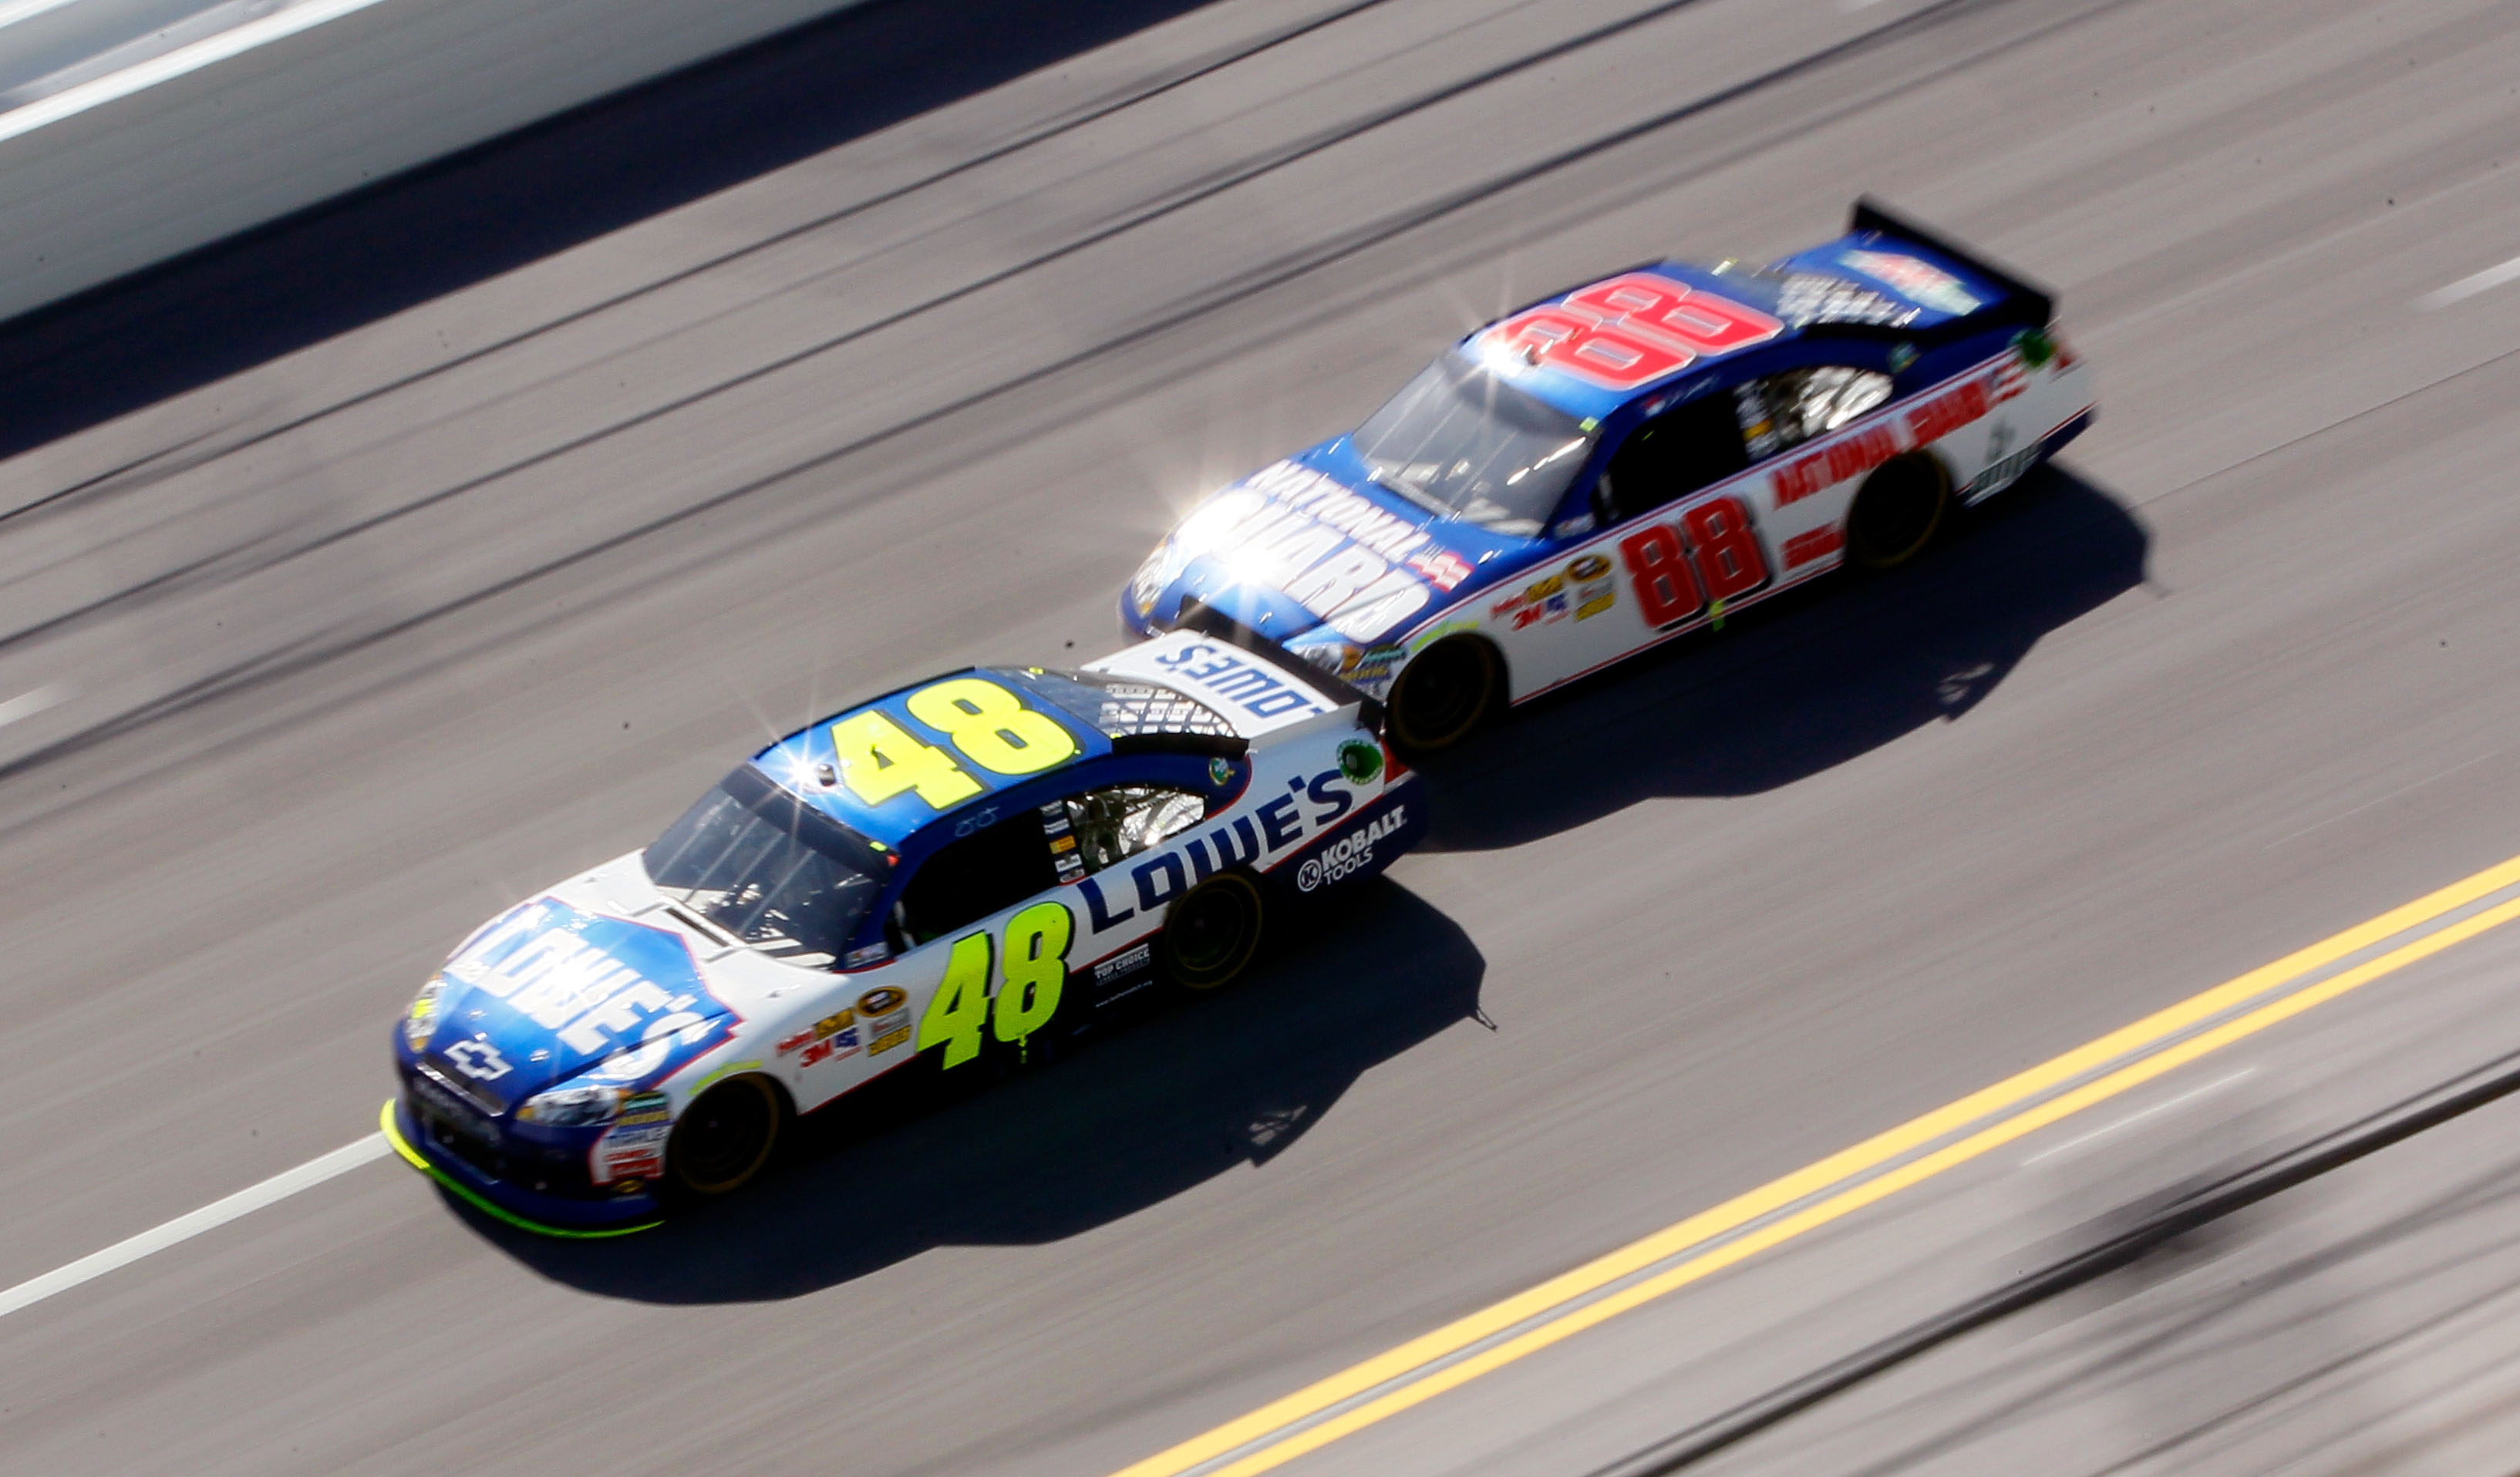 TALLADEGA, AL - APRIL 17:  Jimmie Johnson, driver of the #48 Lowe's Chevrolet, leads Dale Earnhardt Jr., driver of the #88 National Guard/AMP Energy Chevrolet, during the NASCAR Sprint Cup Series Aaron's 499 at Talladega Superspeedway on April 17, 2011 in